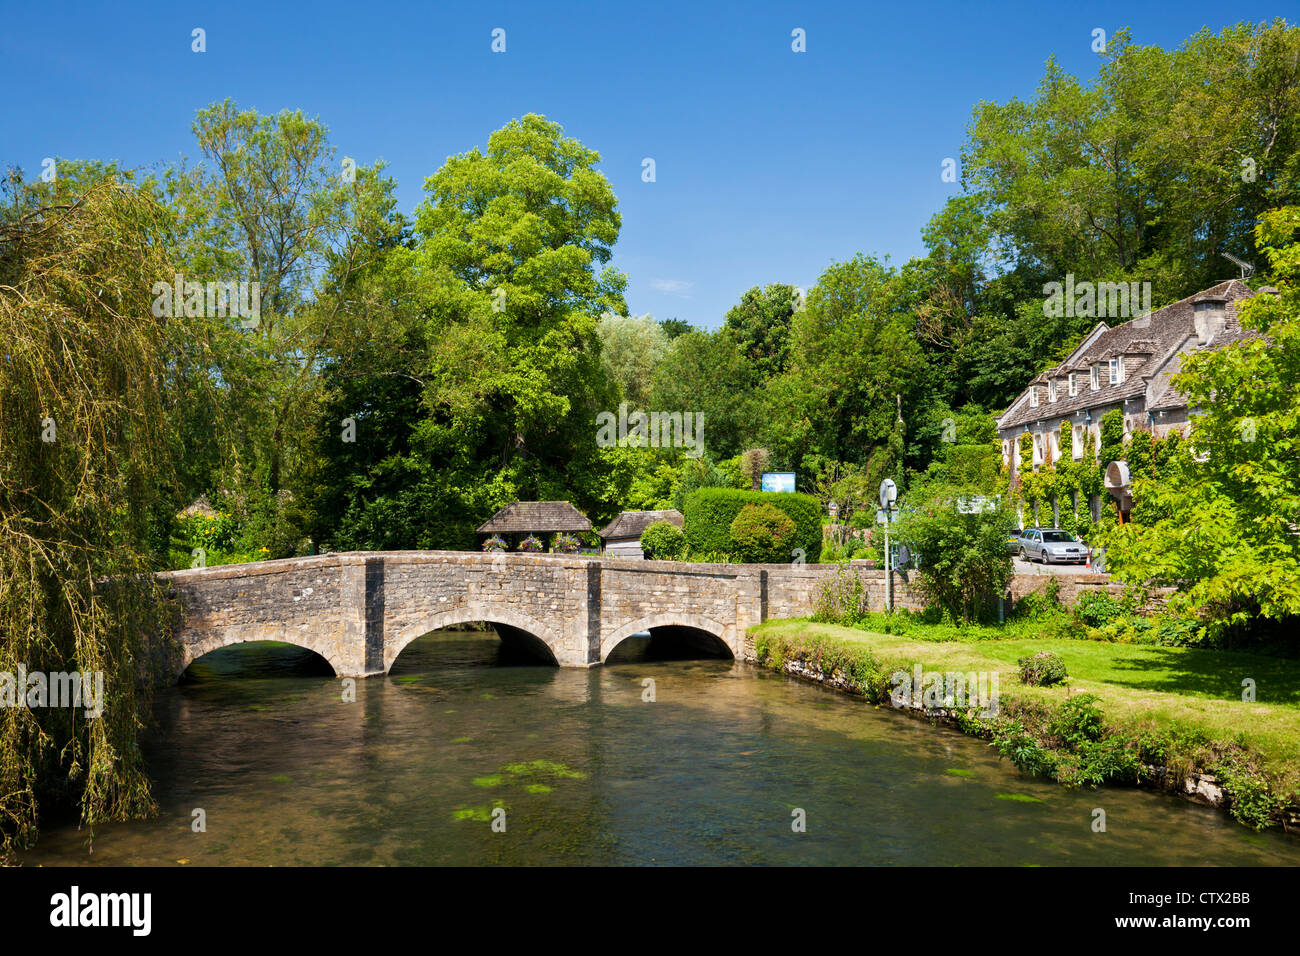 Cotswolds village of Bibury Arched Bridge over the River Coln in Bibury and the Swan Hotel Bibury Cotswolds, Gloucestershire, England, UK, GB, Europe Stock Photo